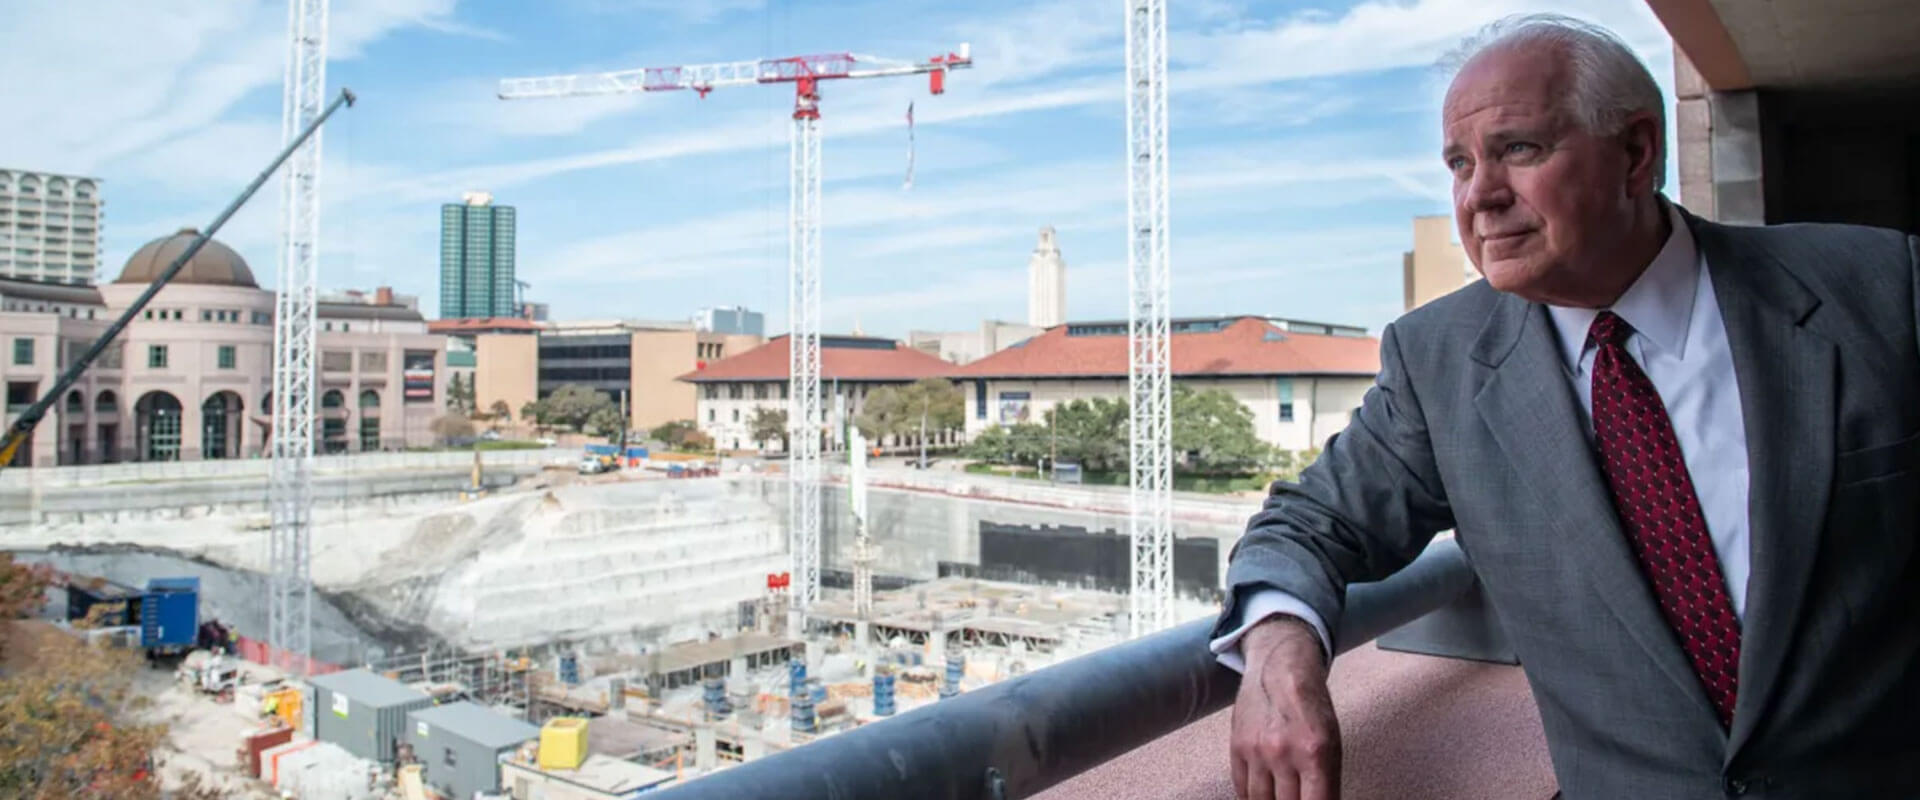 Texas Facilities Commission Executive Director Mike Novak overlooks the Capitol Complex Project construction site in 2019. The site, located at 1801 Congress Ave., is being transformed into a five-story underground parking garage, office building, and grass mall. Credit: Angela Piazza for the San Antonio Report